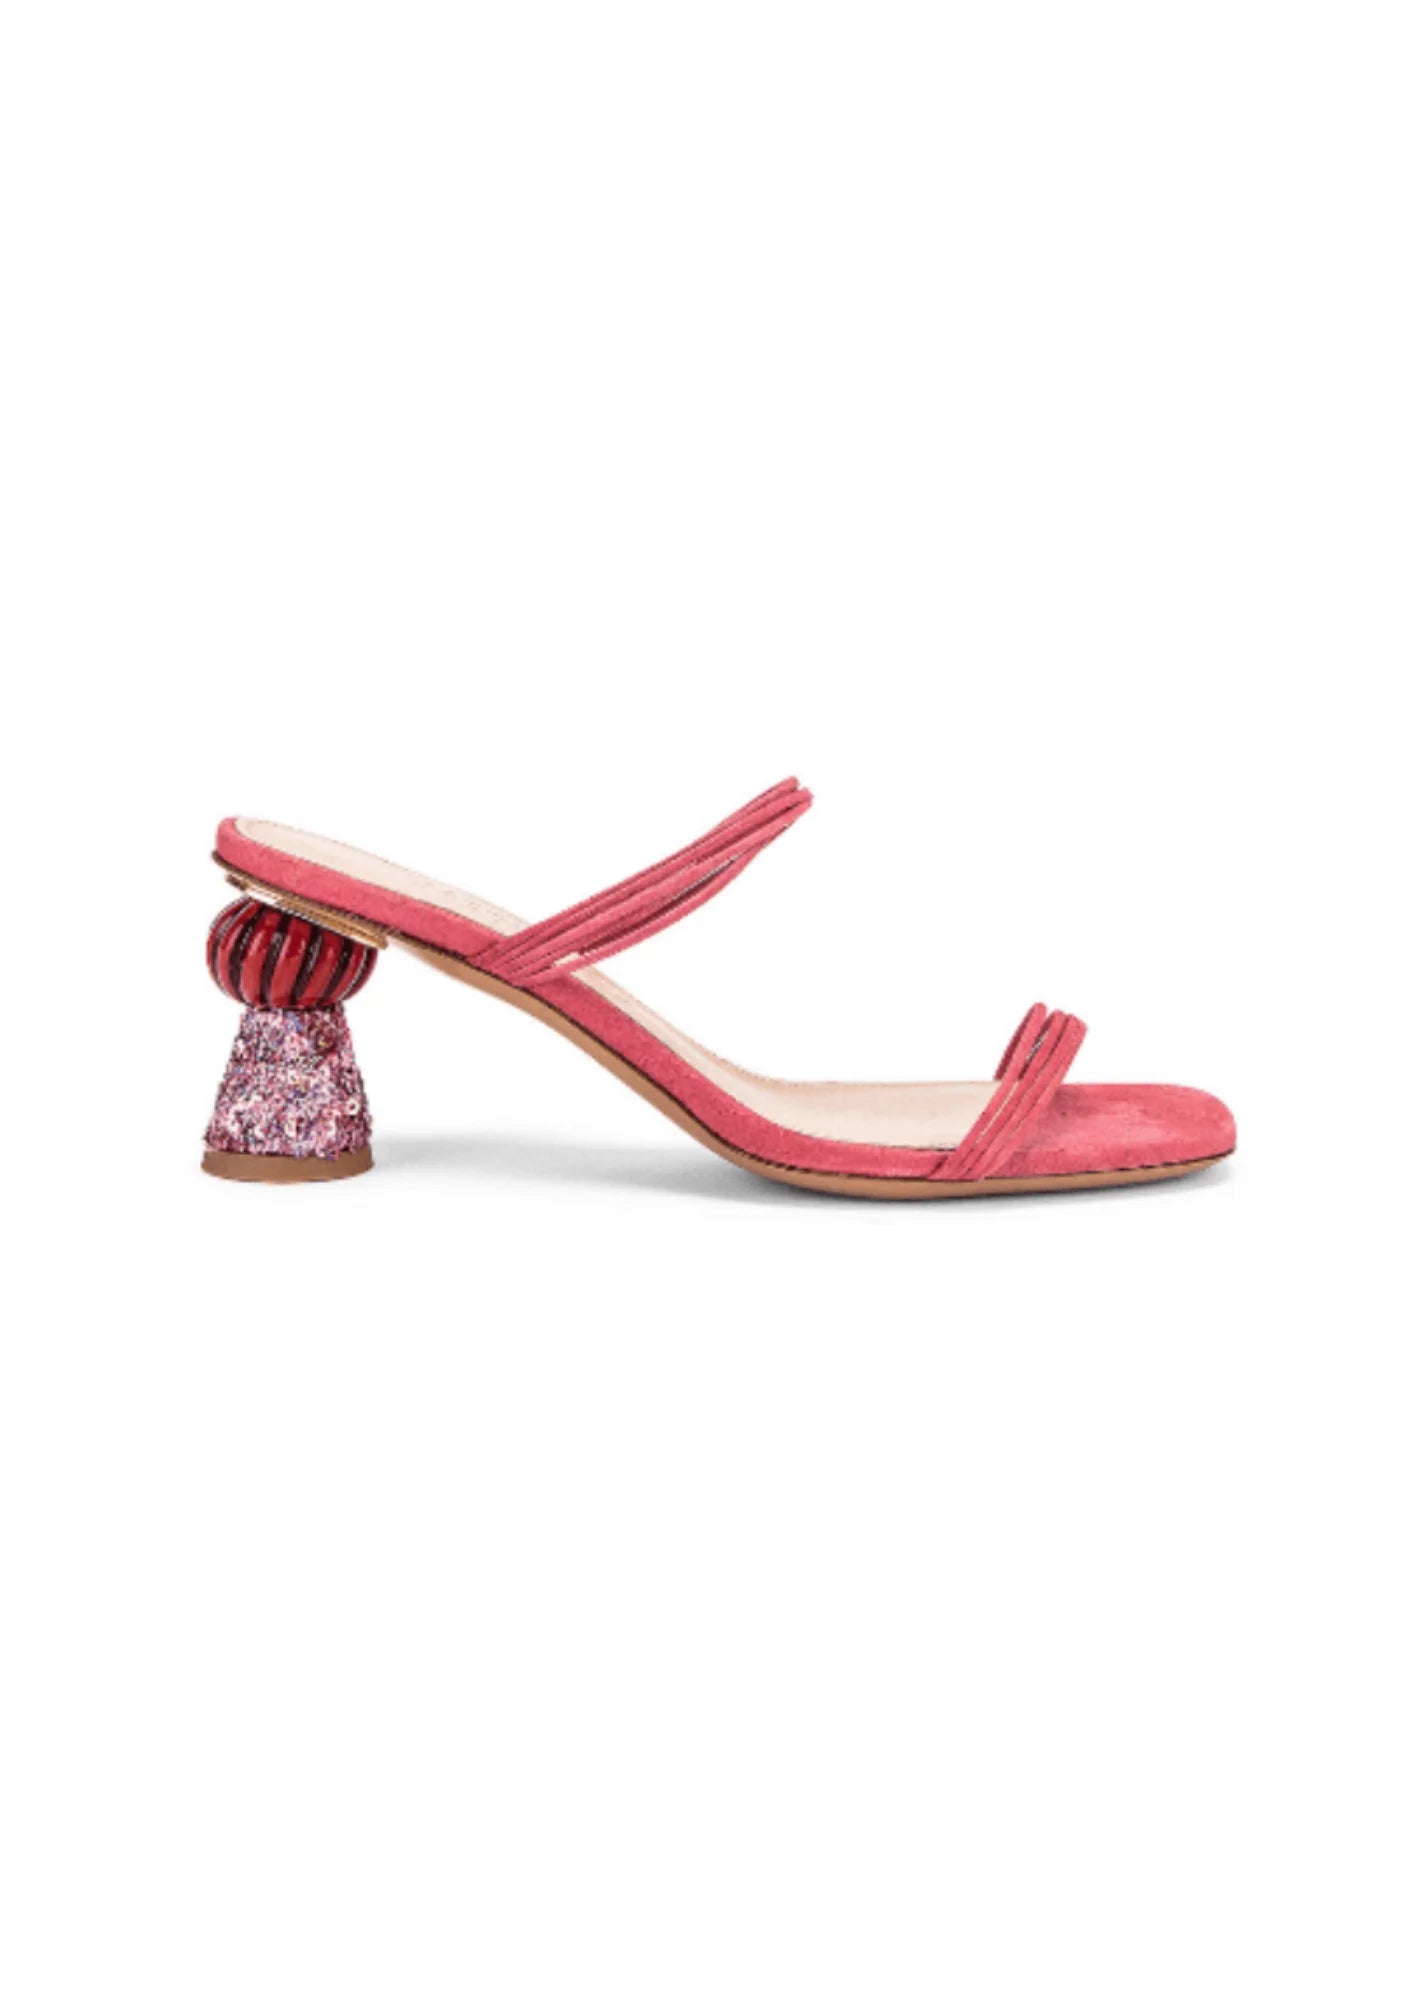 LIGHT PINK MULES WITH SEQUINS